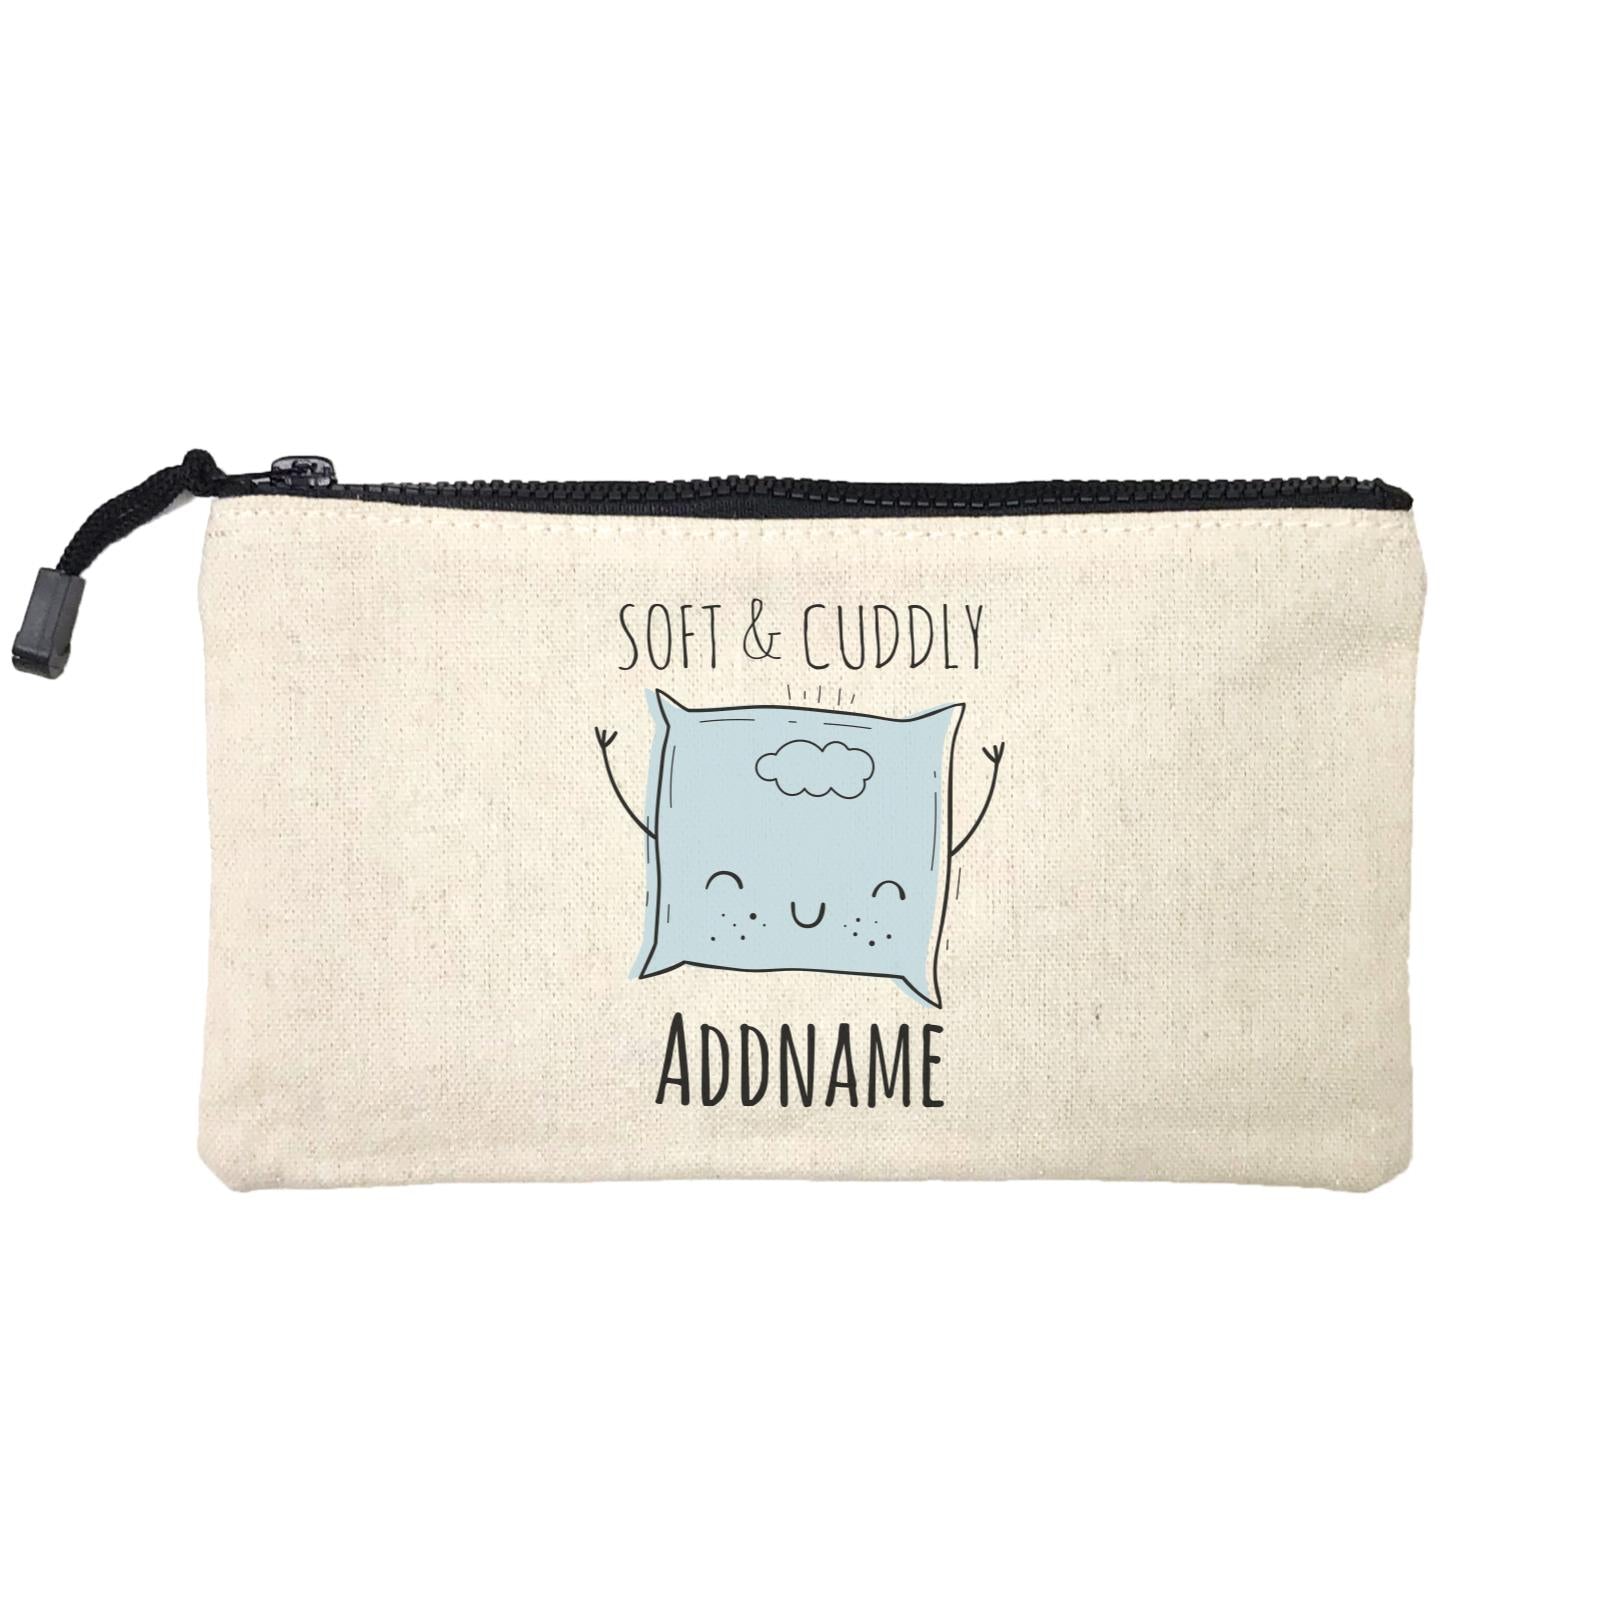 Drawn Newborn Element Soft and Cuddly Addname Mini Accessories Stationery Pouch